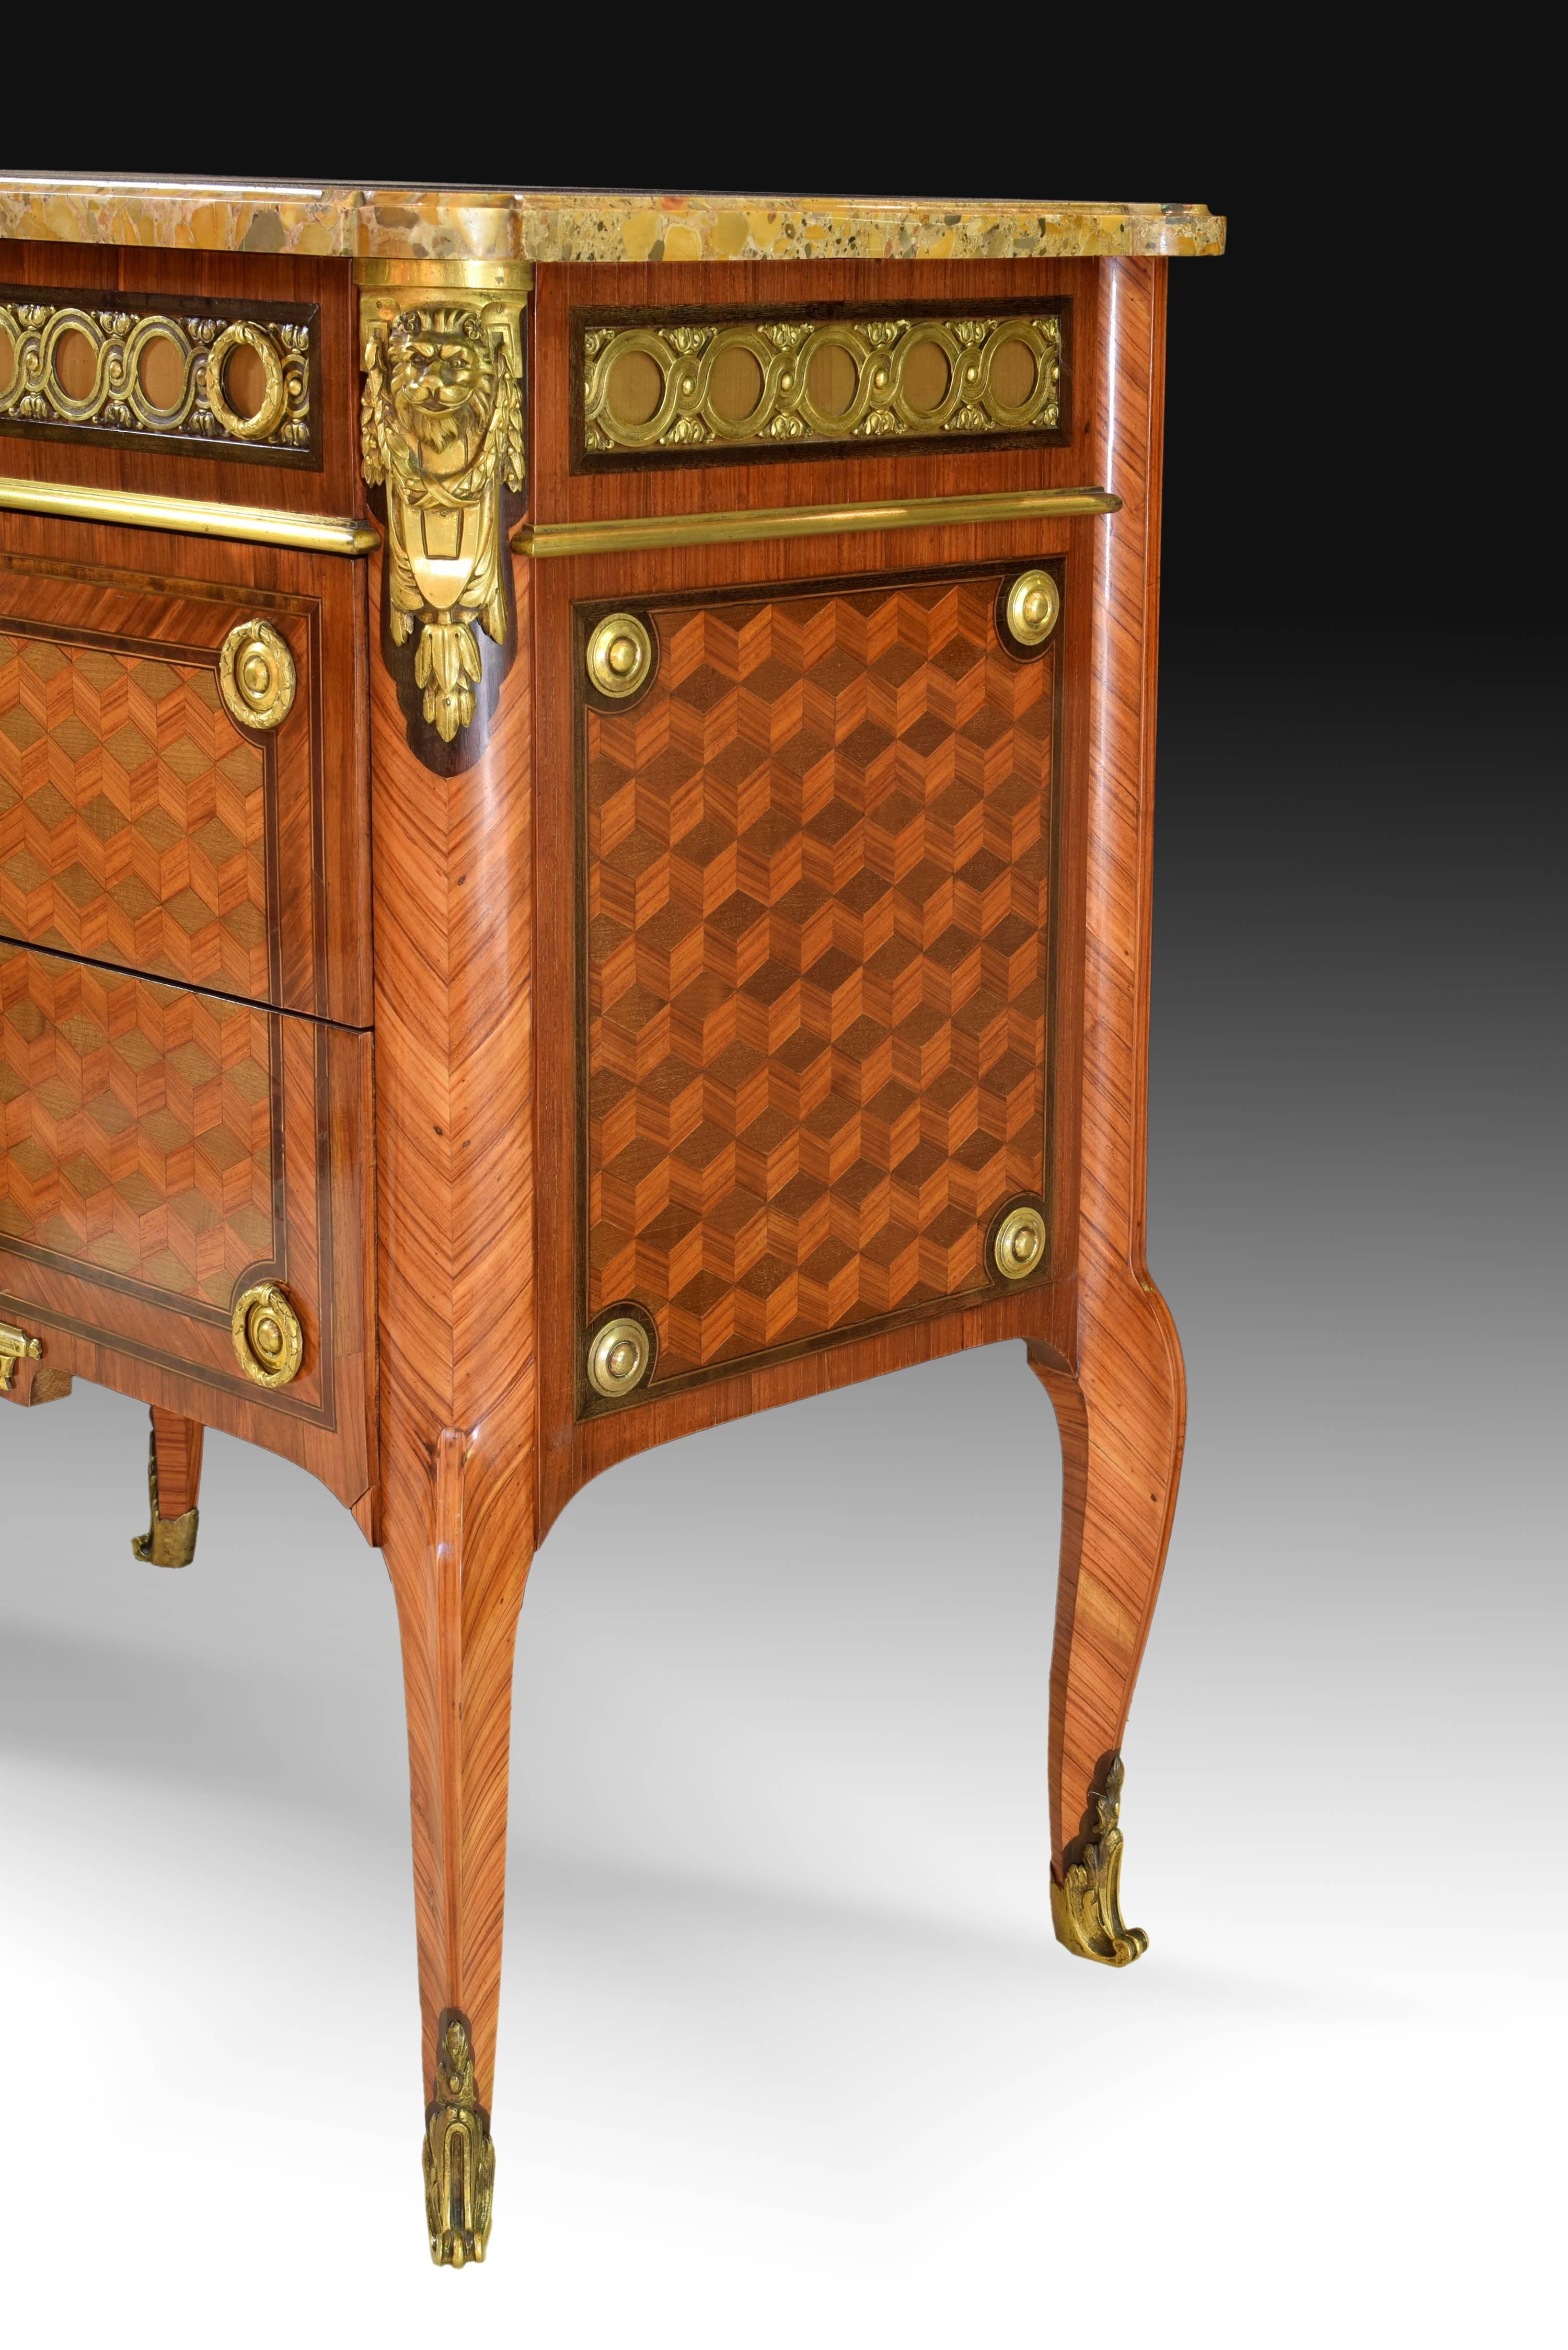 Carved Transition-Louis XVI Style Commode, France, End 19th-20th Century Stamped Jansen